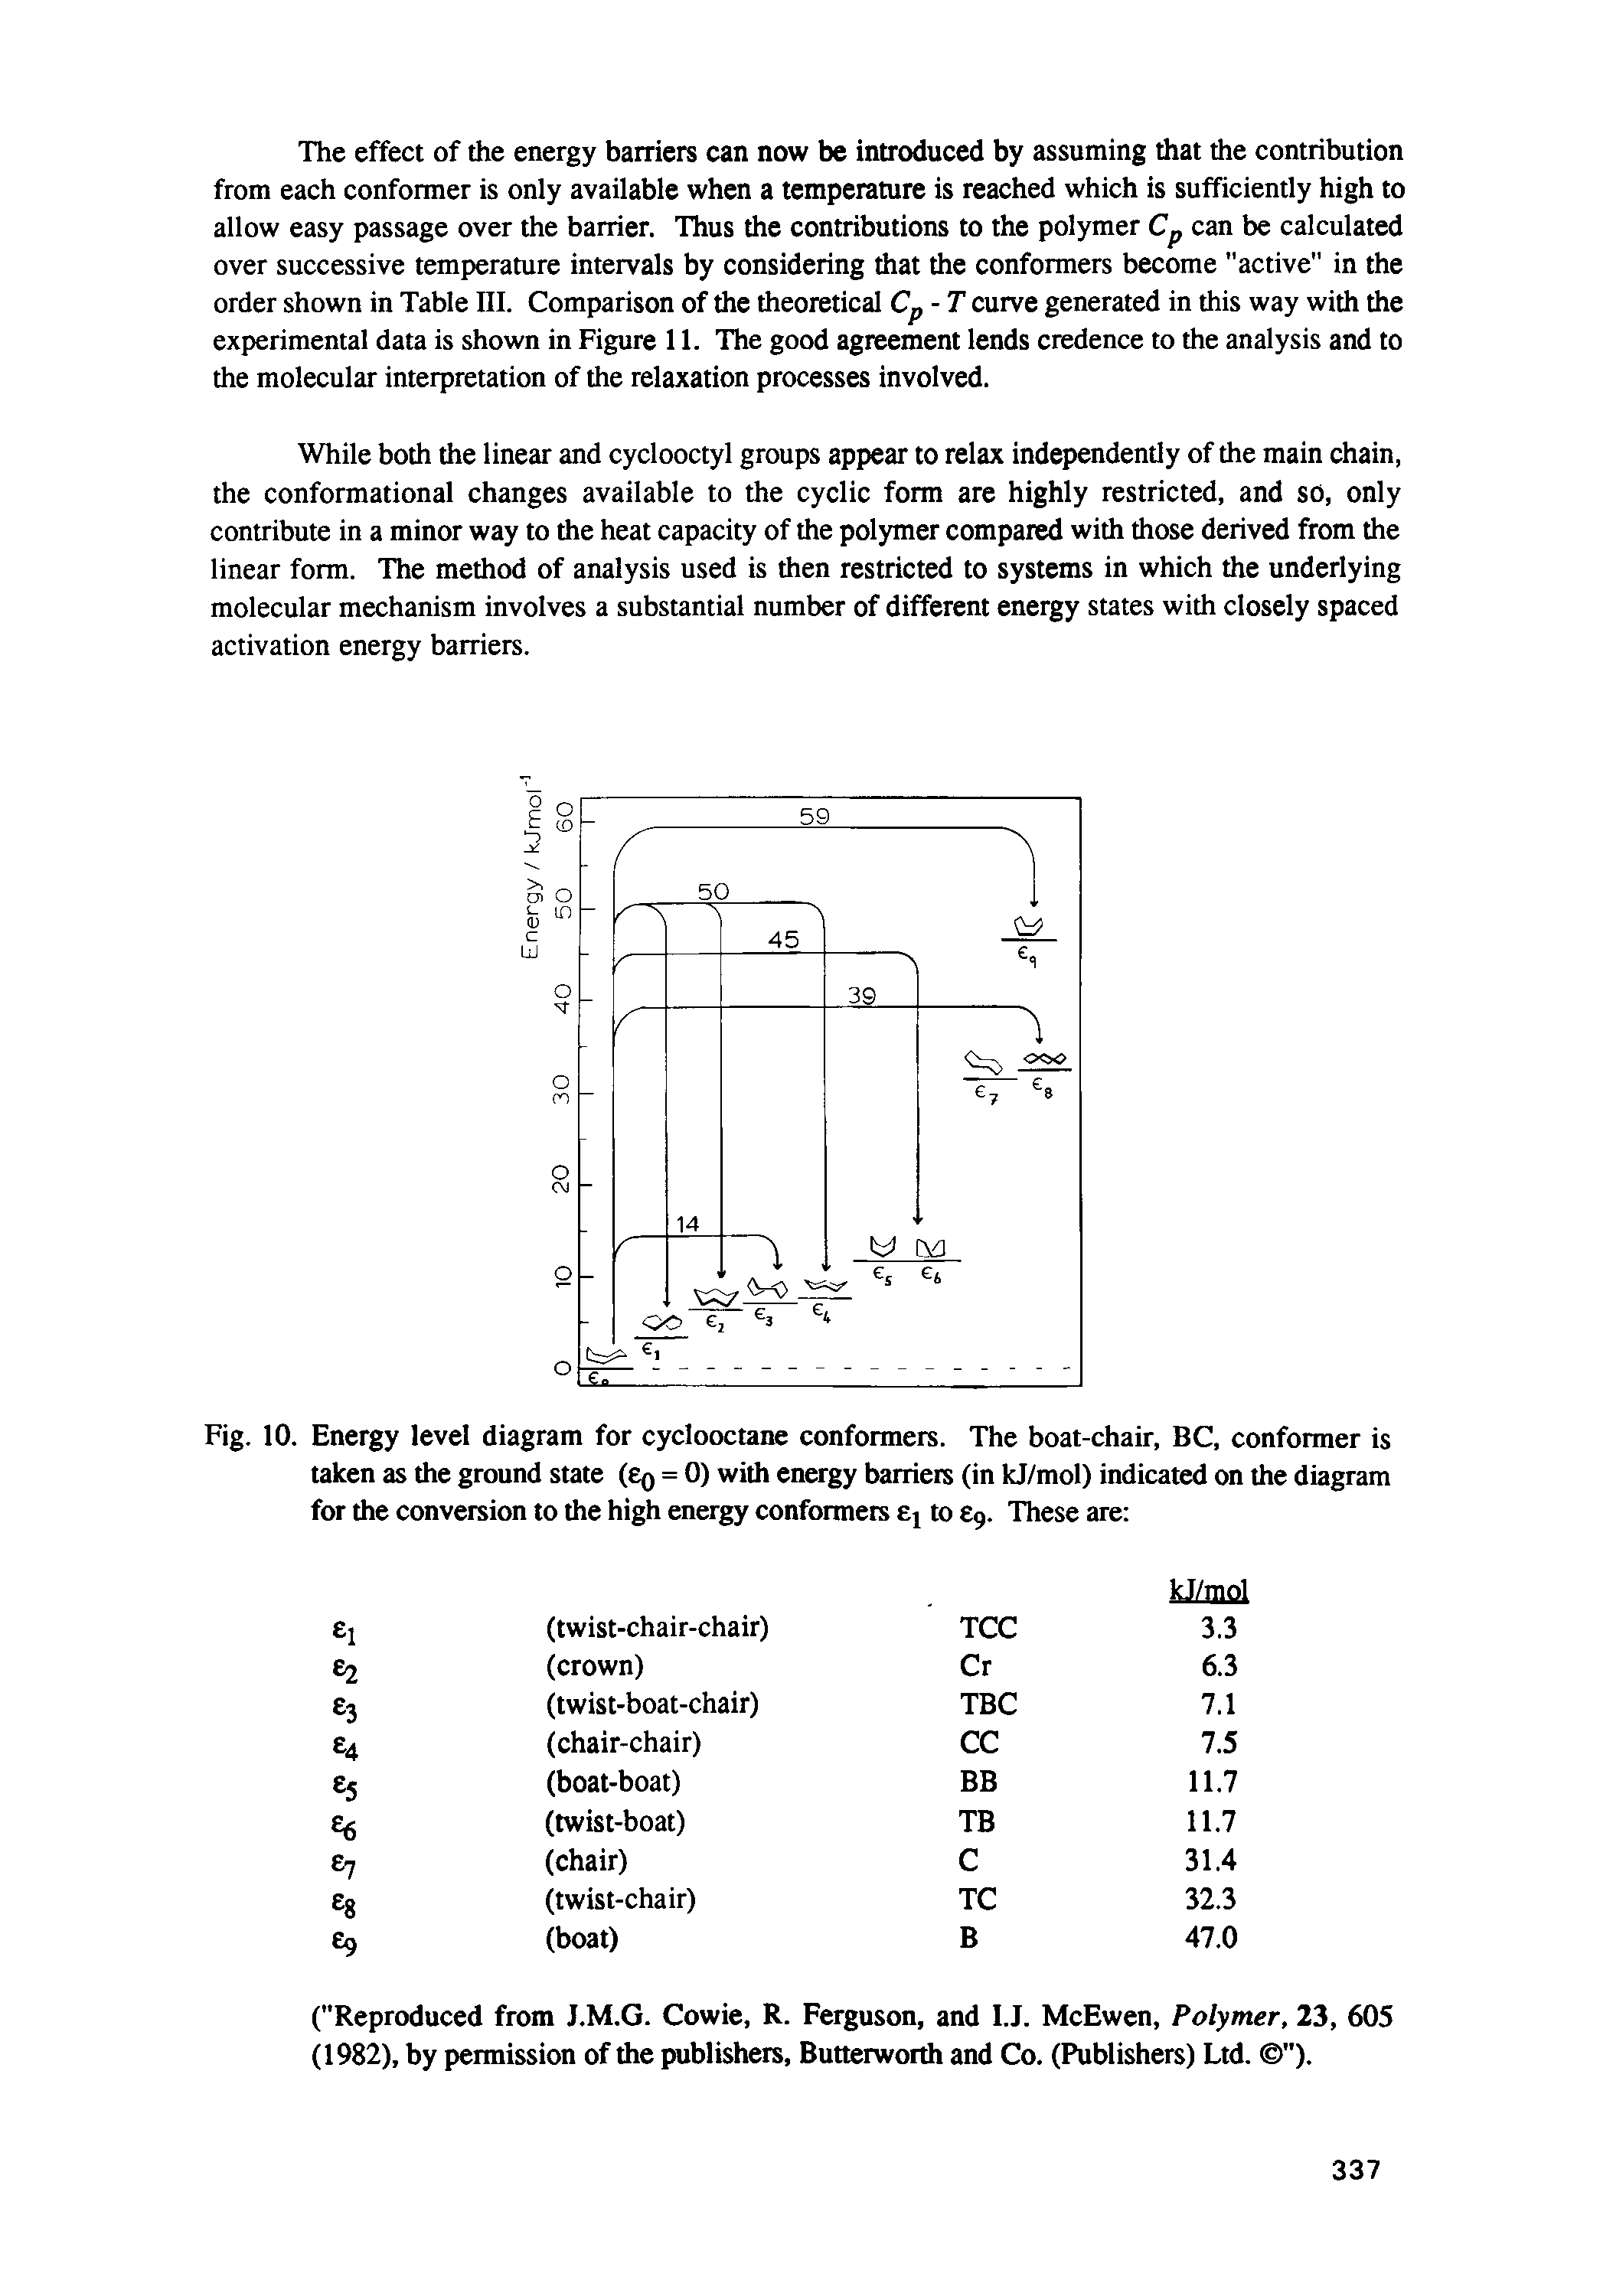 Fig. 10. Energy level diagram for cyclooctane conformers. The boat-chair, BC, conformer is taken as the ground state (Zq = 0) with energy barriers (in kJ/mol) indicated on the diagram for the conversion to the high energy conformers Ej to 69. These are ...